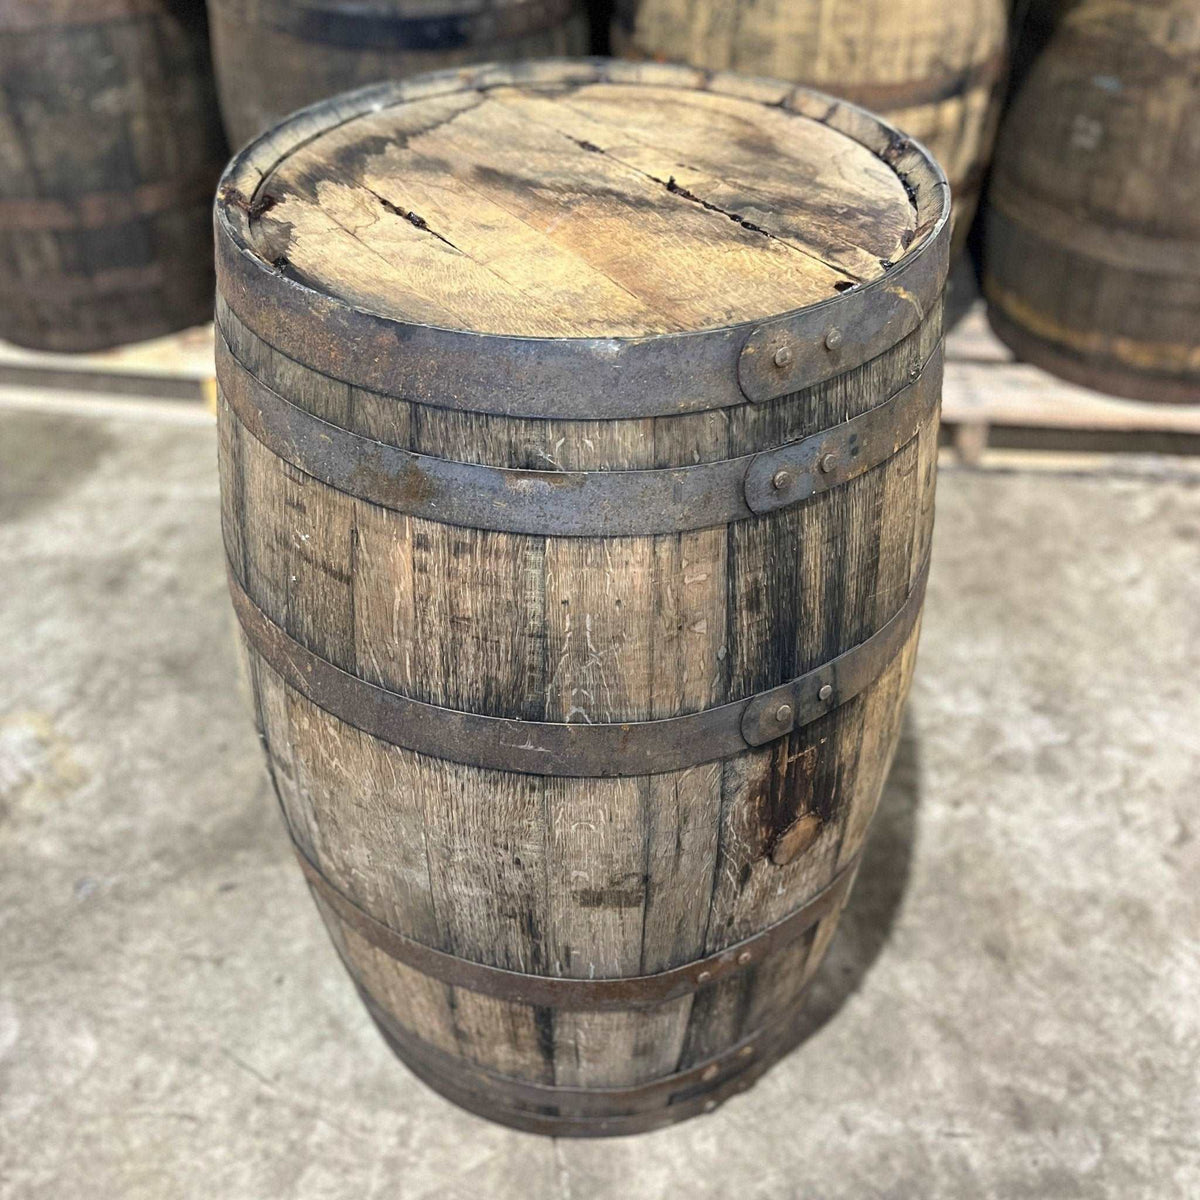 Canadian Whisky Barrel - Furniture Grade – The County Cooperage